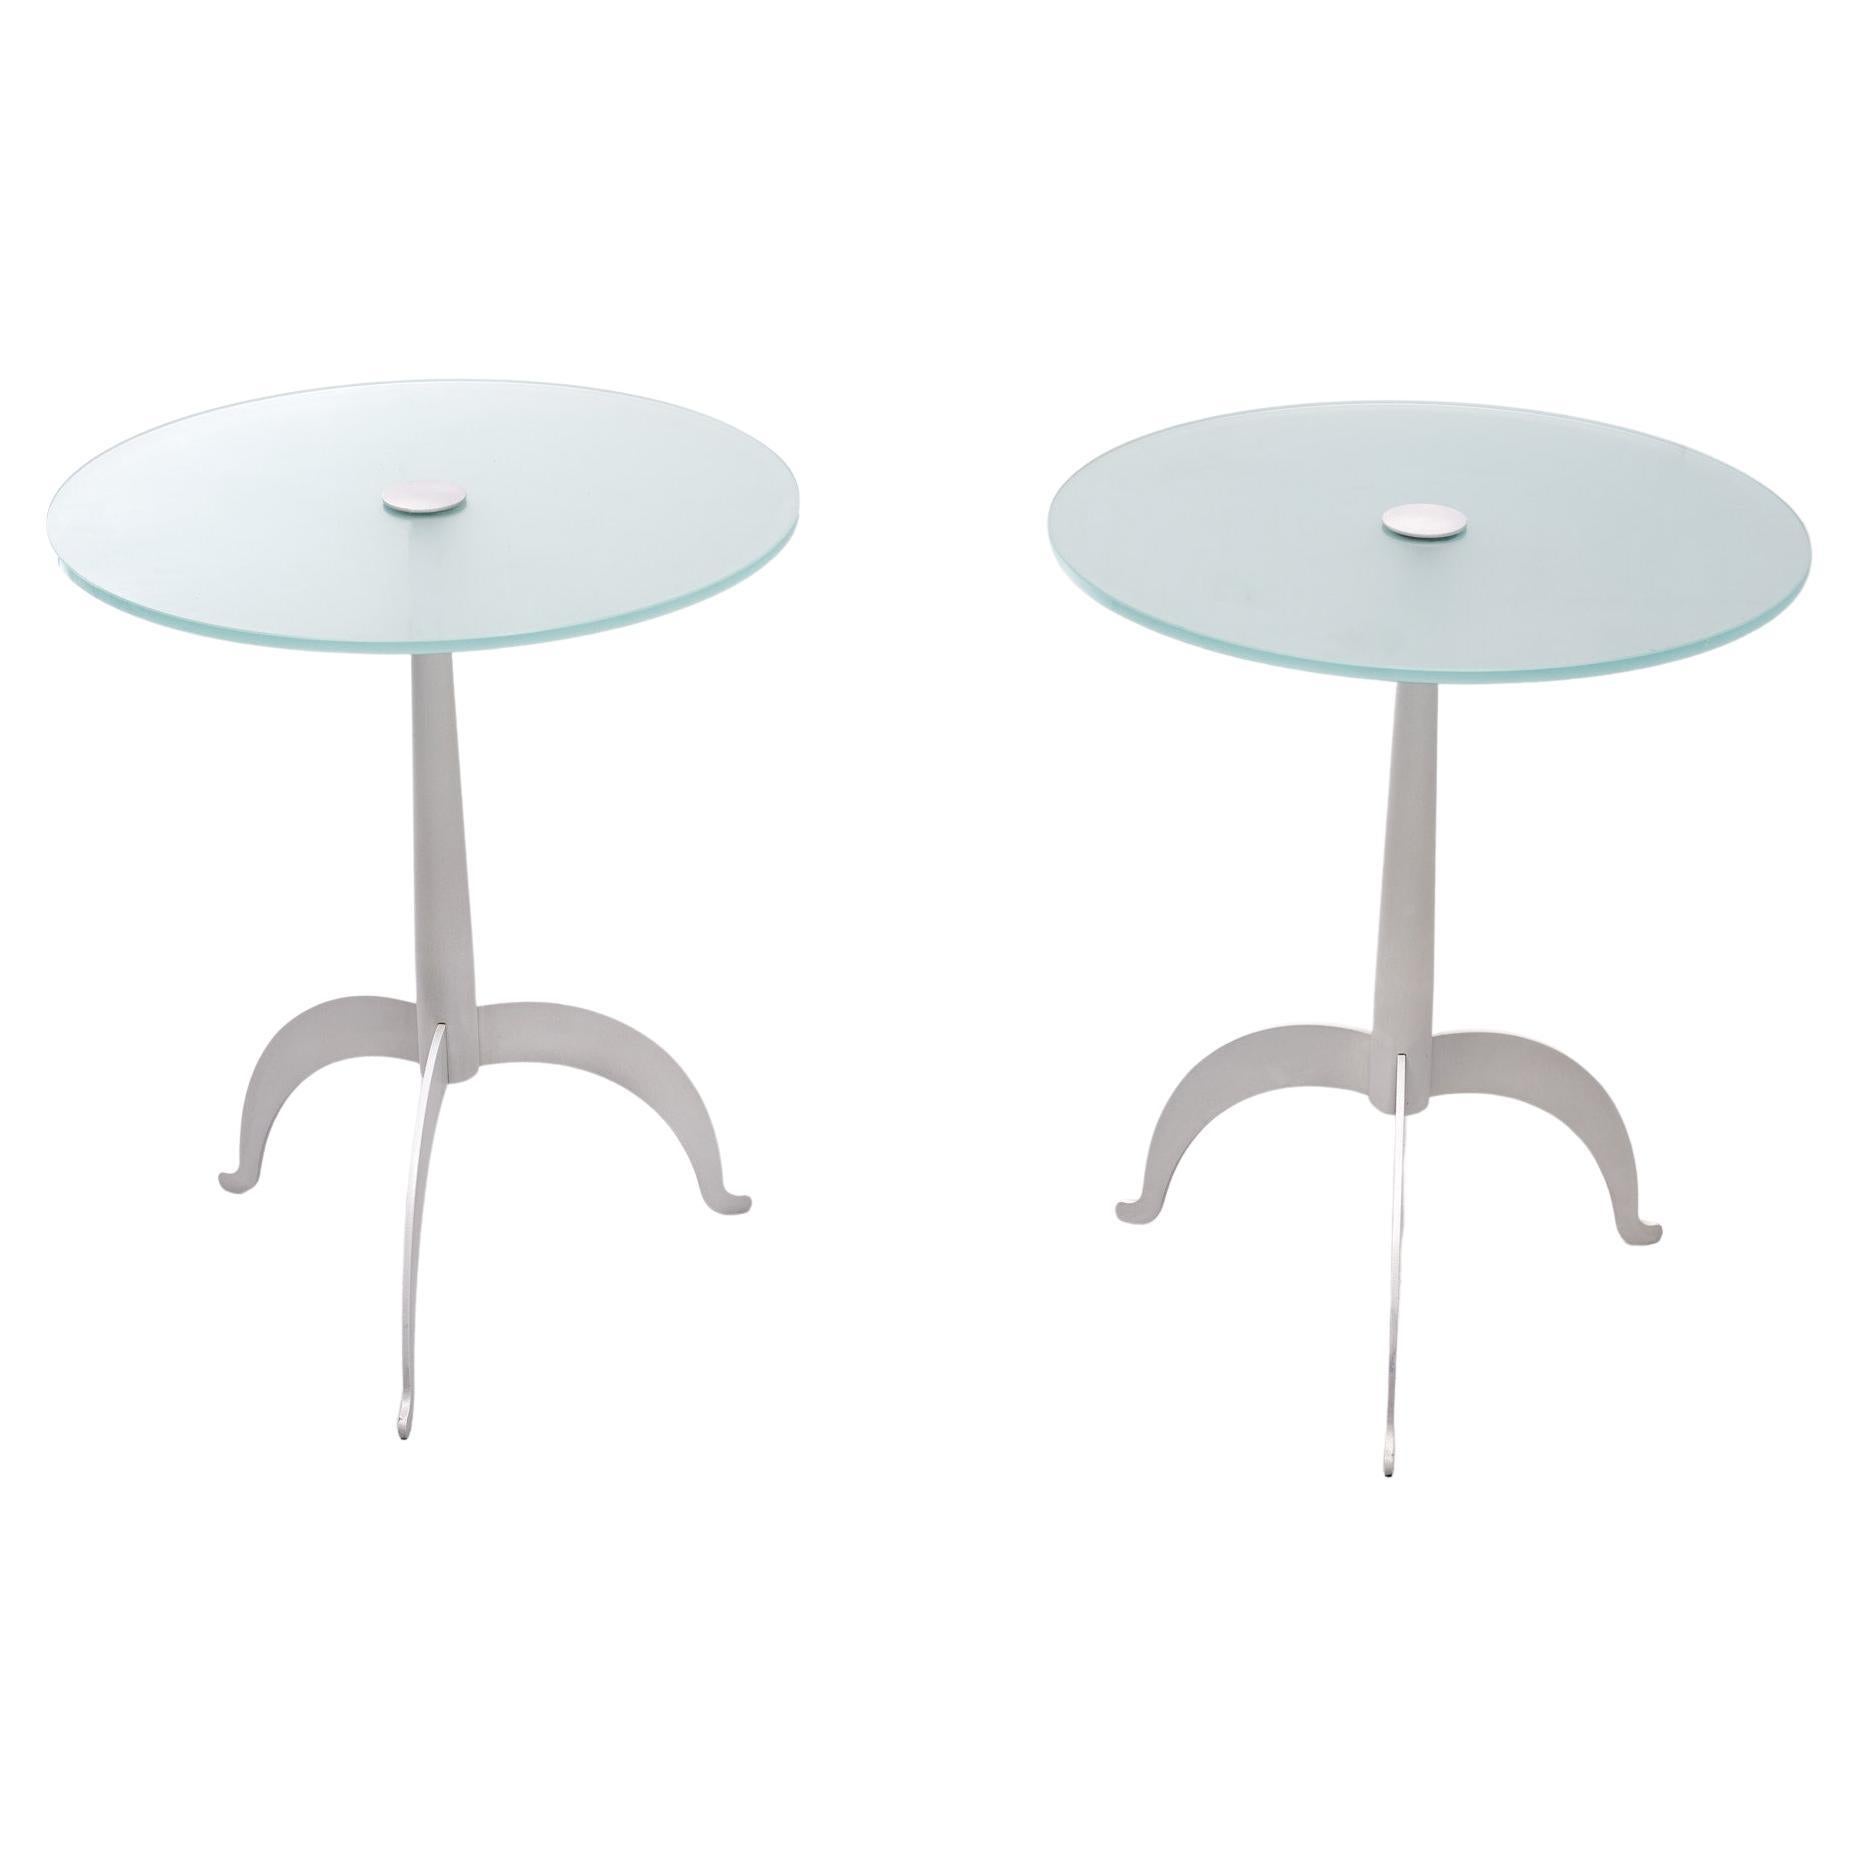 Two lovely side tables. Tripod steel base, light grey color comes with a thick Greenish glass top . Signed ''Fly-Line Italy '' Attributed to Designer Giandomenico Belotti, good condition.